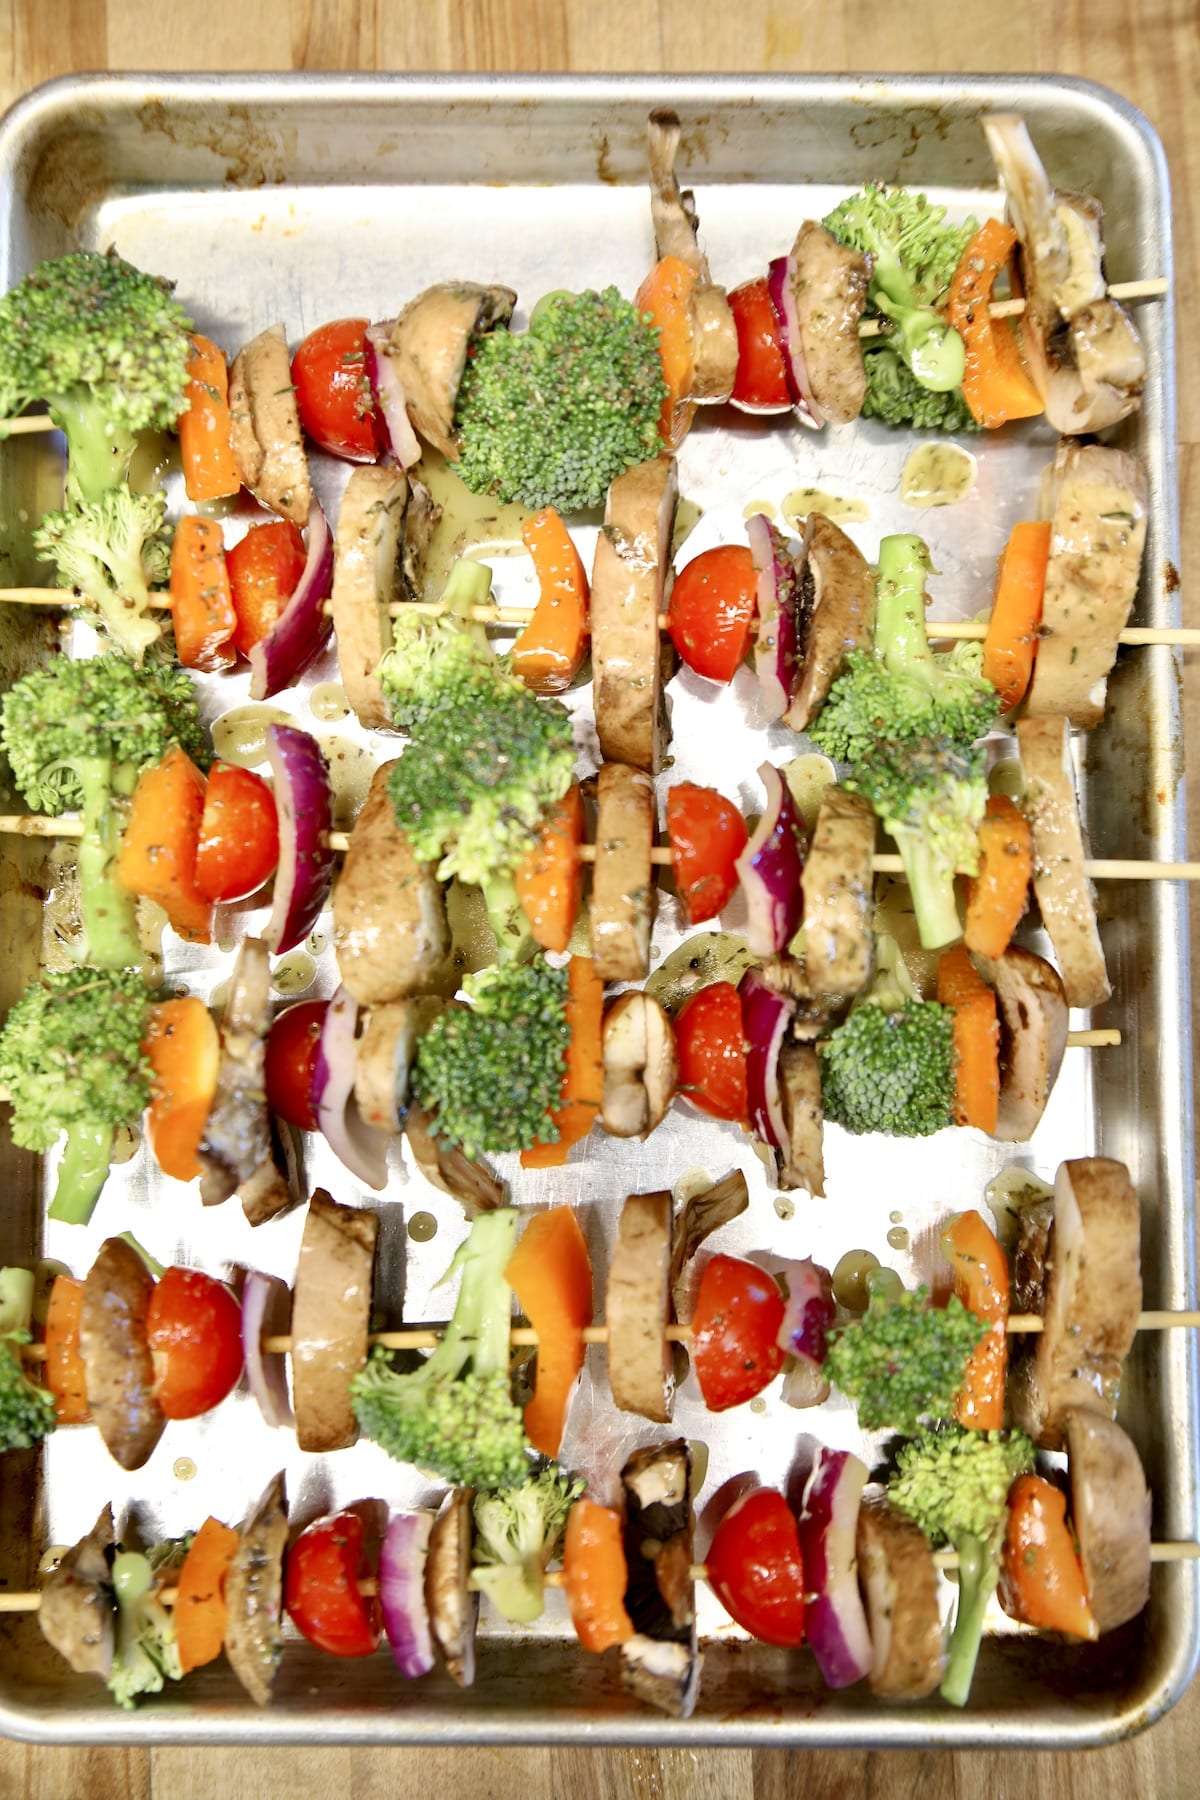 Sheet pan with uncooked vegetable kabobs.